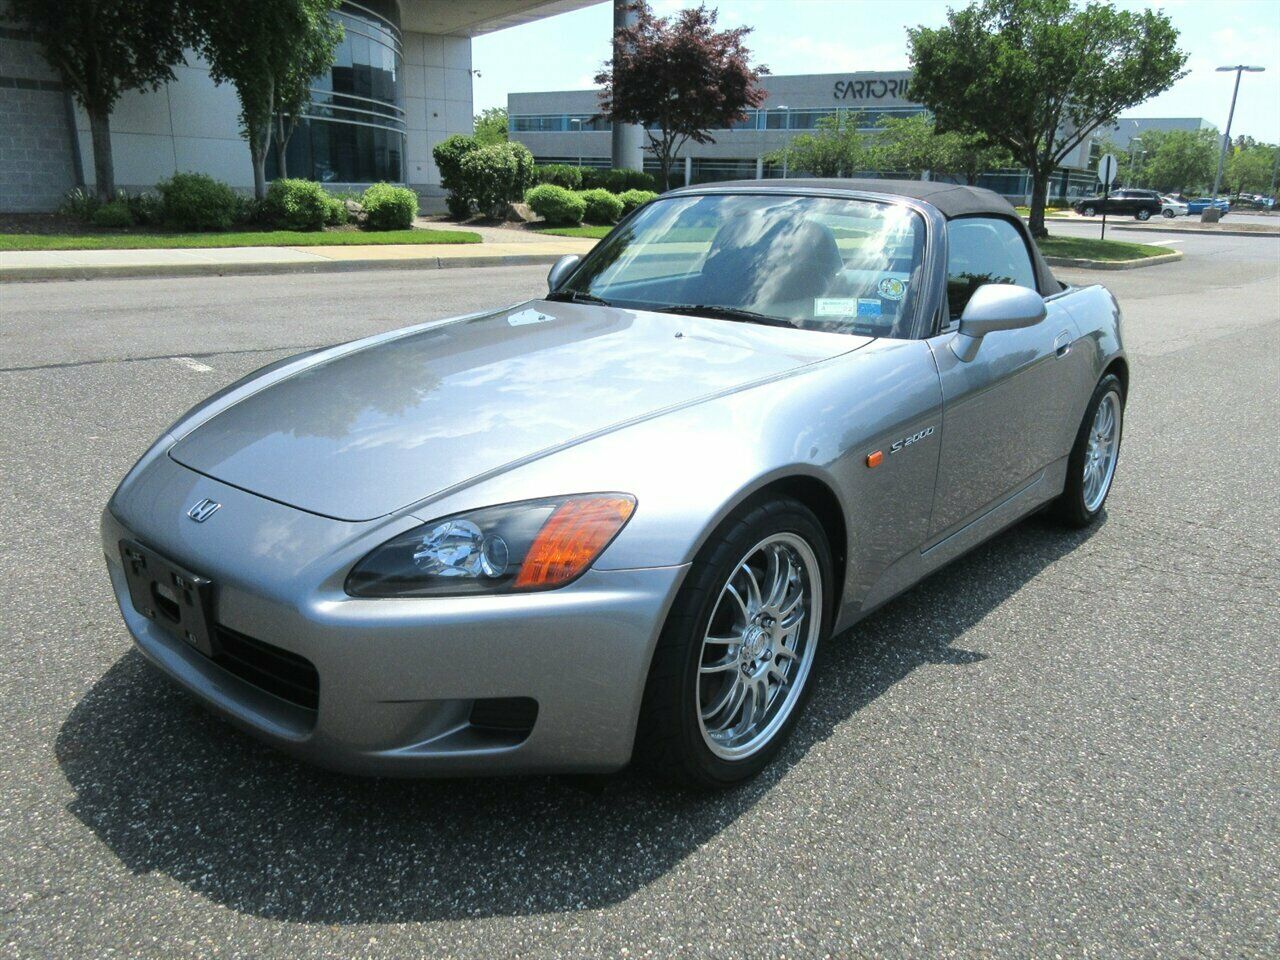 2000 S2000  2000 Honda S2000 6 Speed Manual Low Miles 1 Owner Stunning Convertible Rare Find